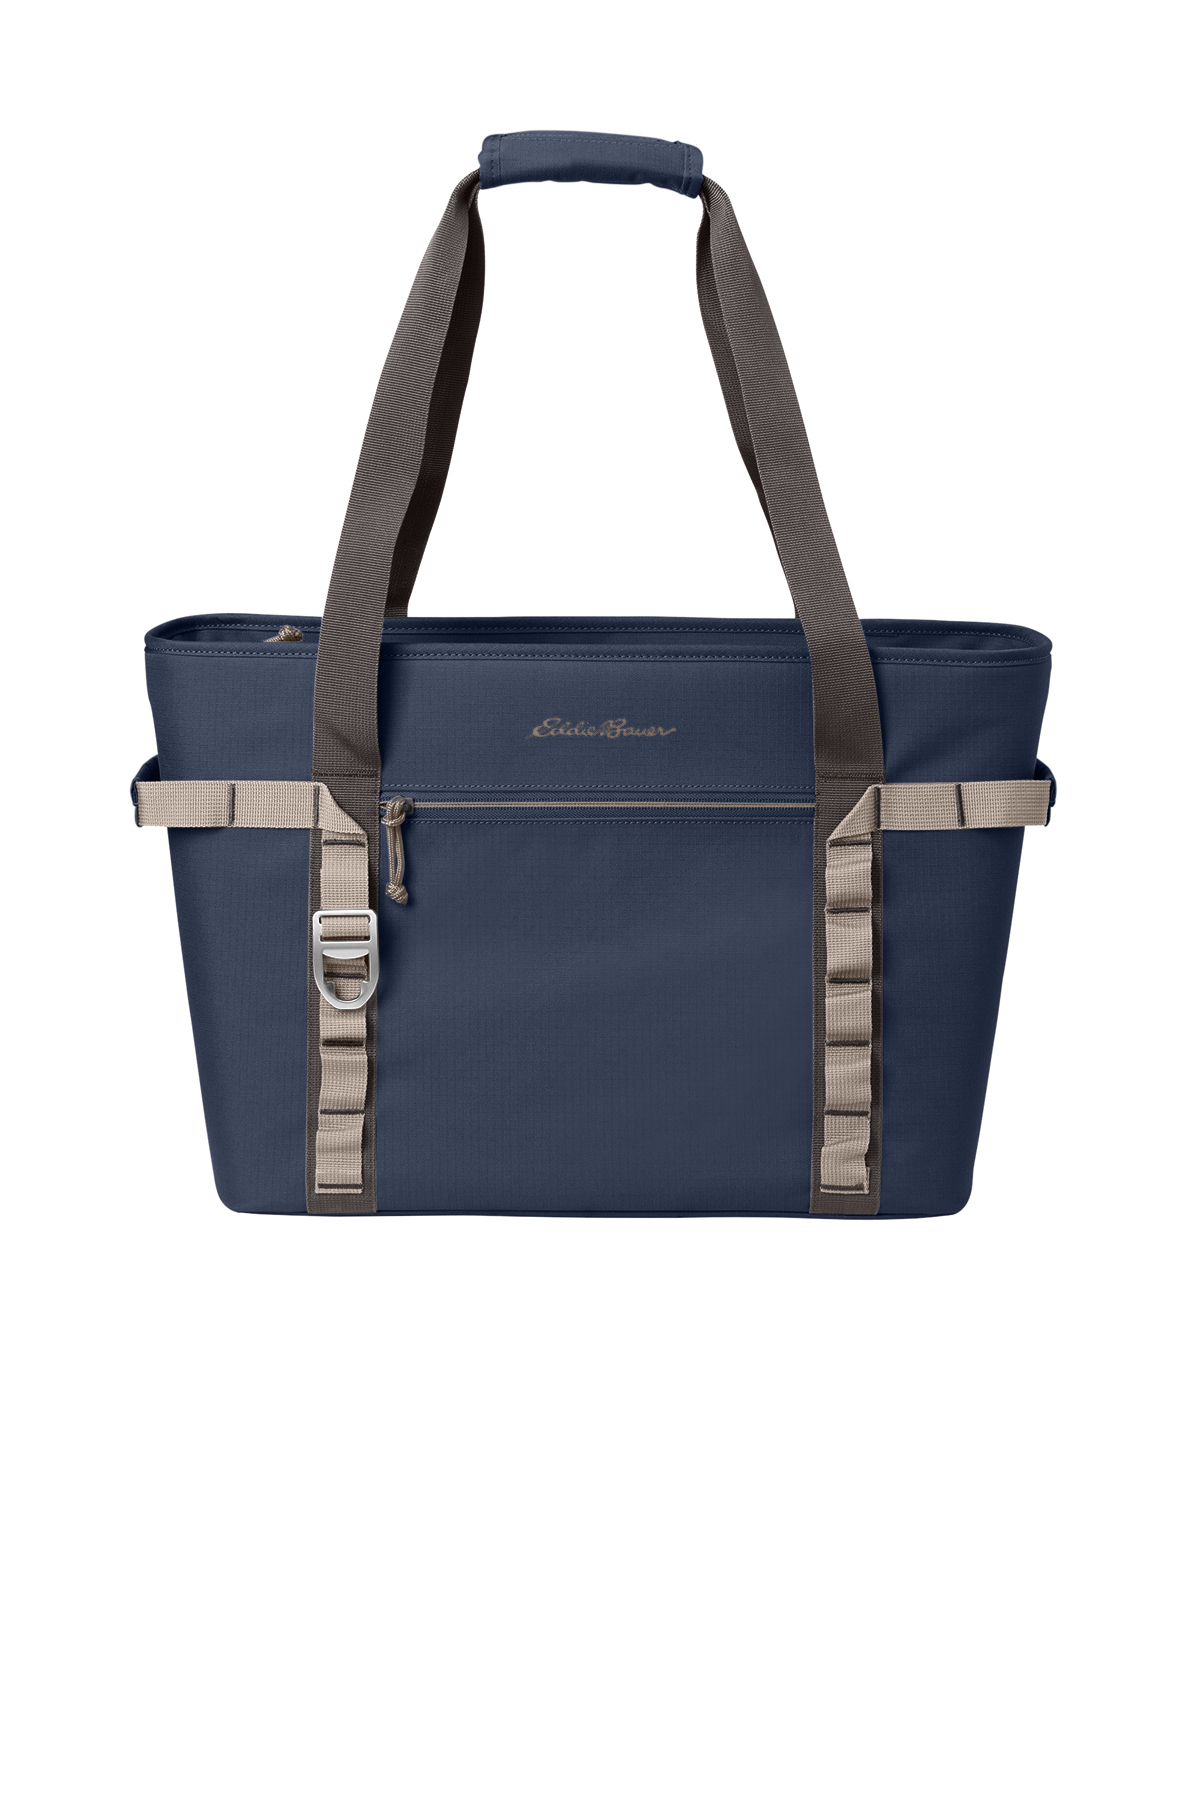 Eddie Bauer Max Cool Tote Cooler, Product